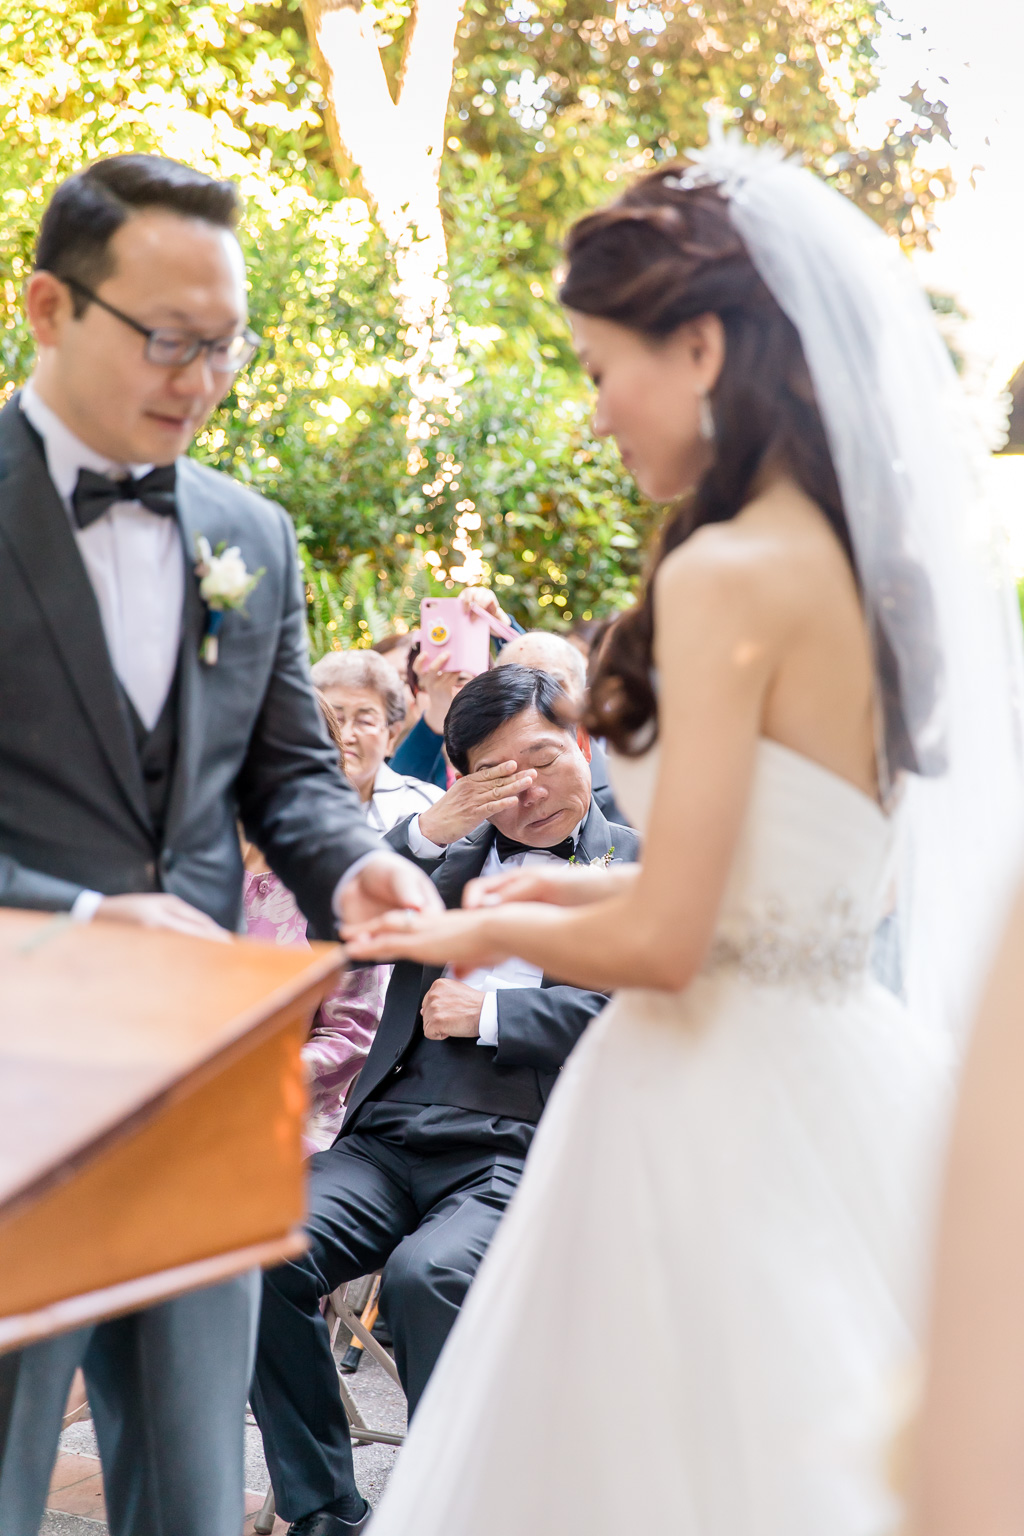 father wiping tears in wedding ceremony audience